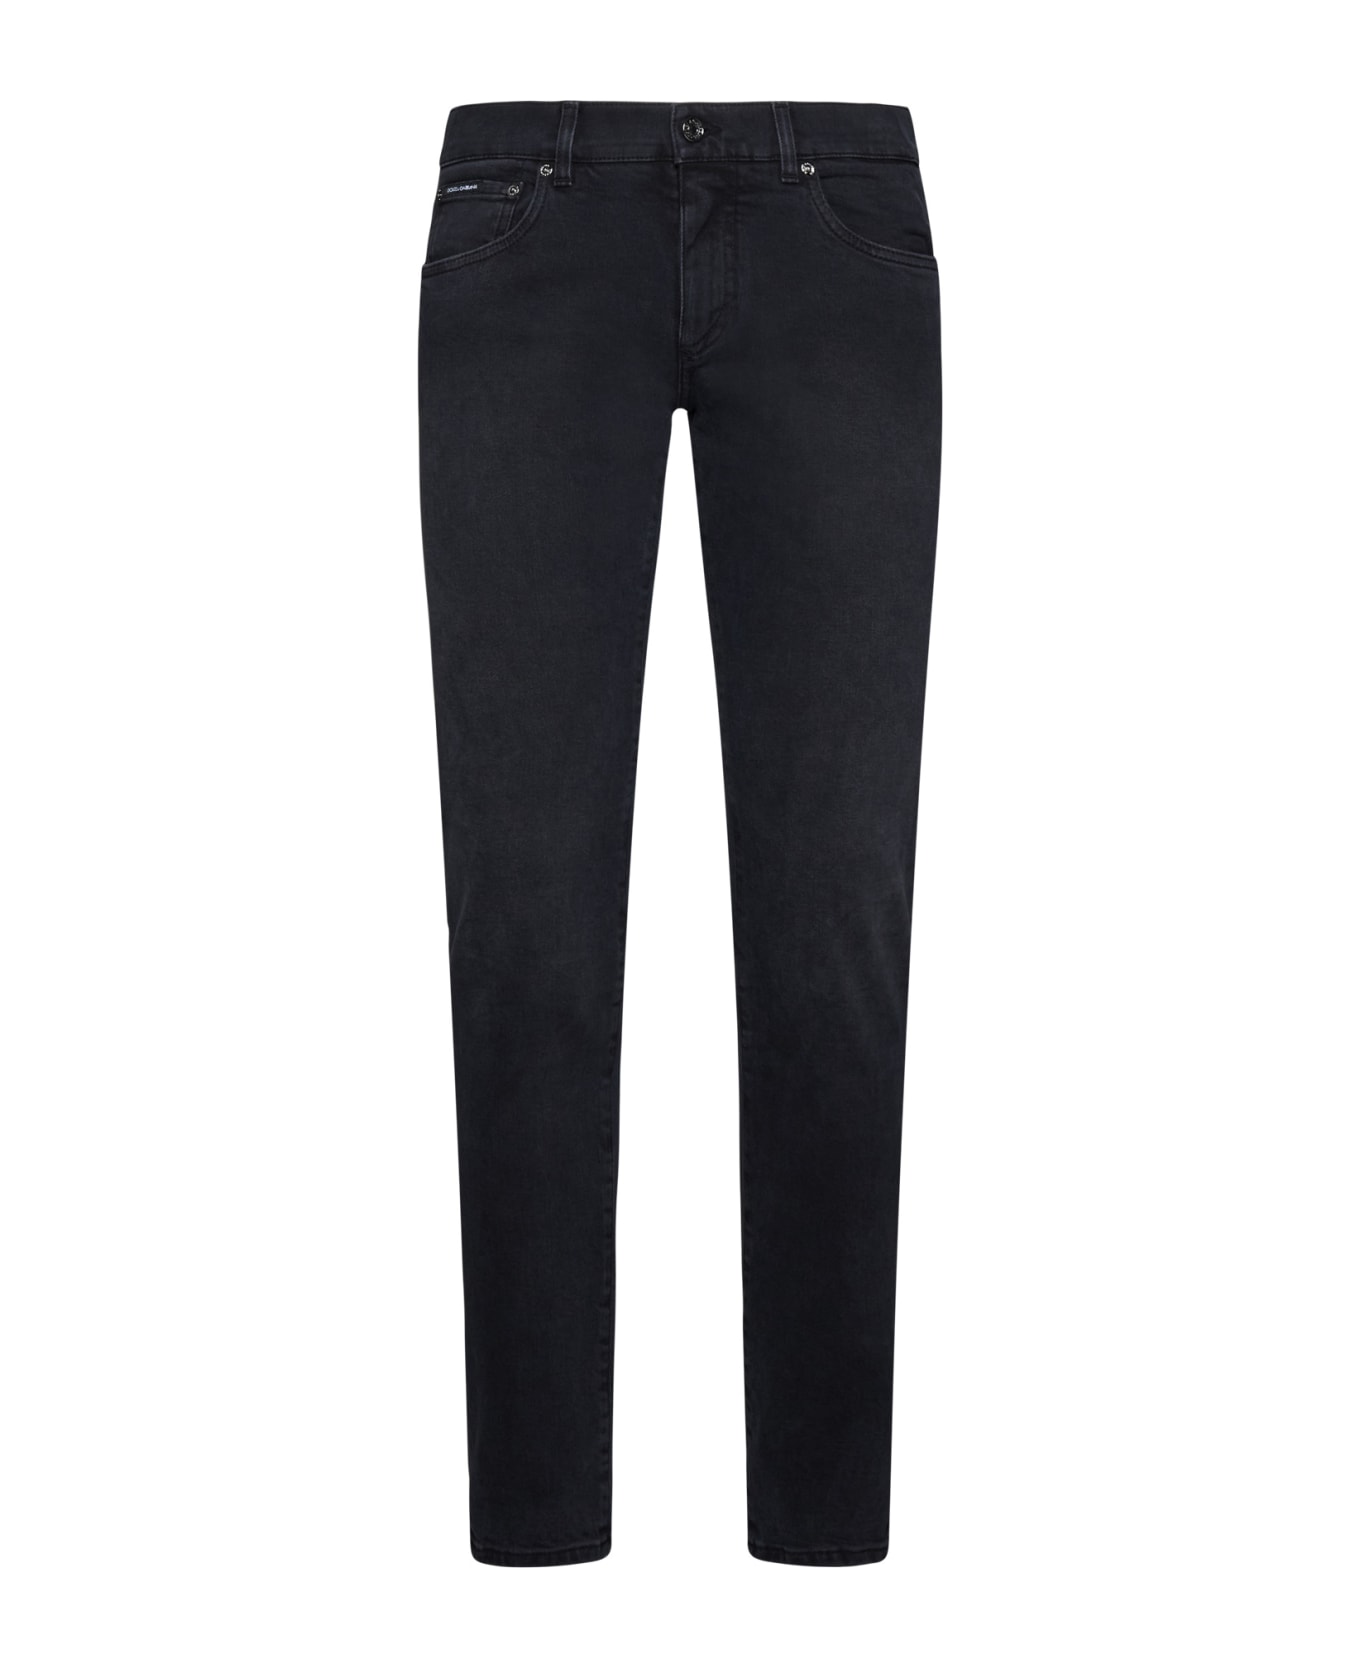 Dolce & Gabbana Buttoned Fitted Jeans - Variante abbinata